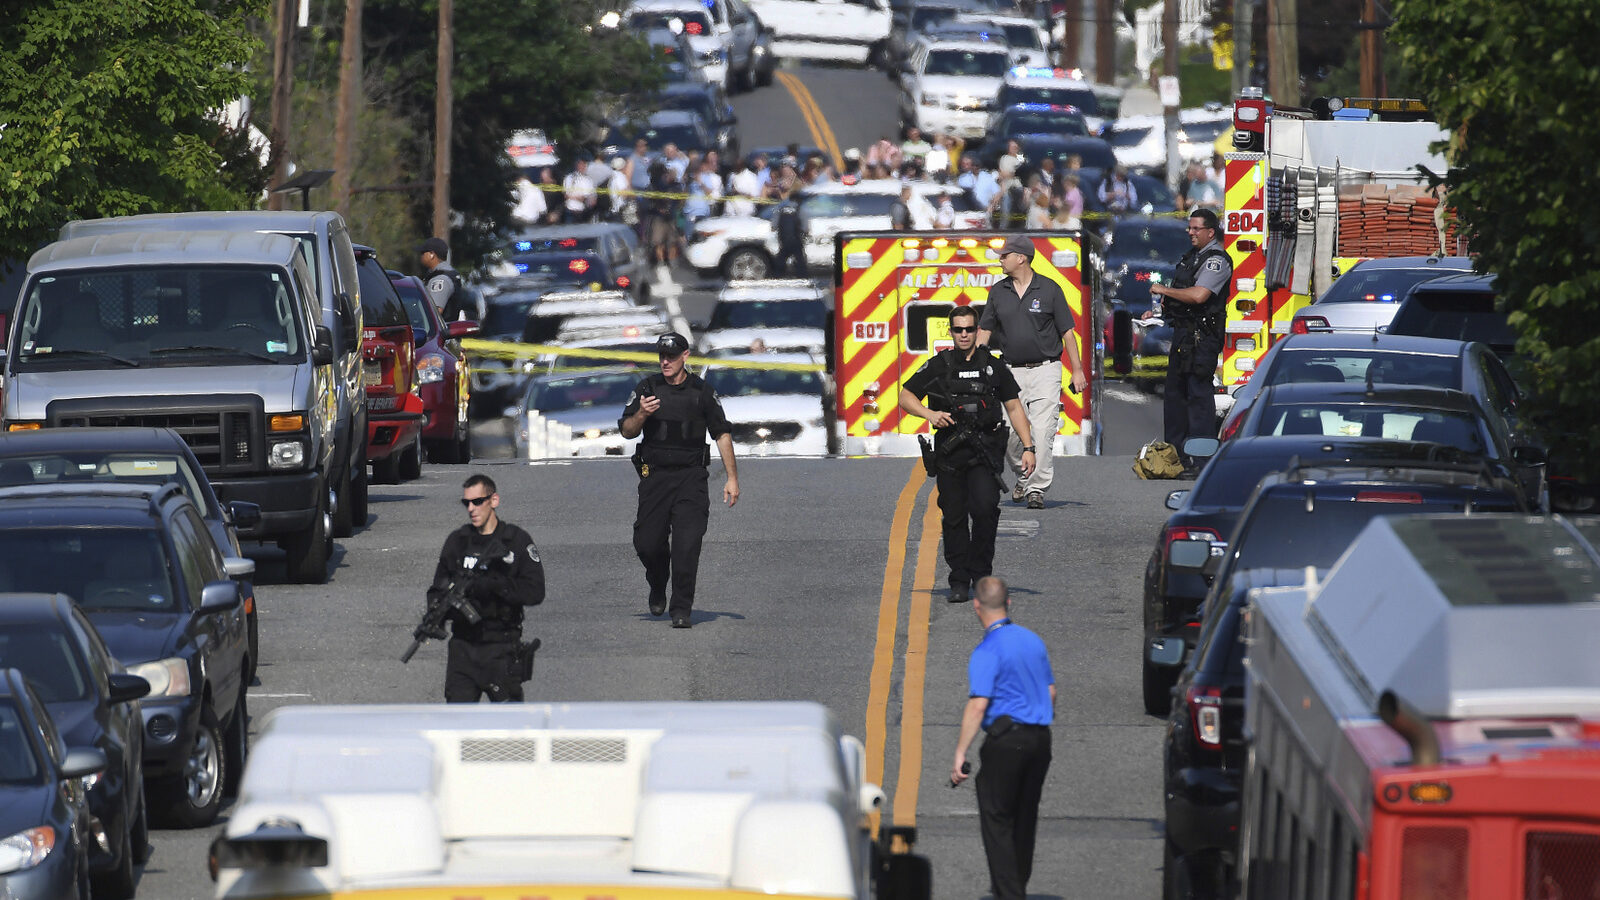 Emergency personnel respond after reports of shots fired Wednesday June 14, 2017 in Alexandria, Va. (Matt McClain/The Washington Post)